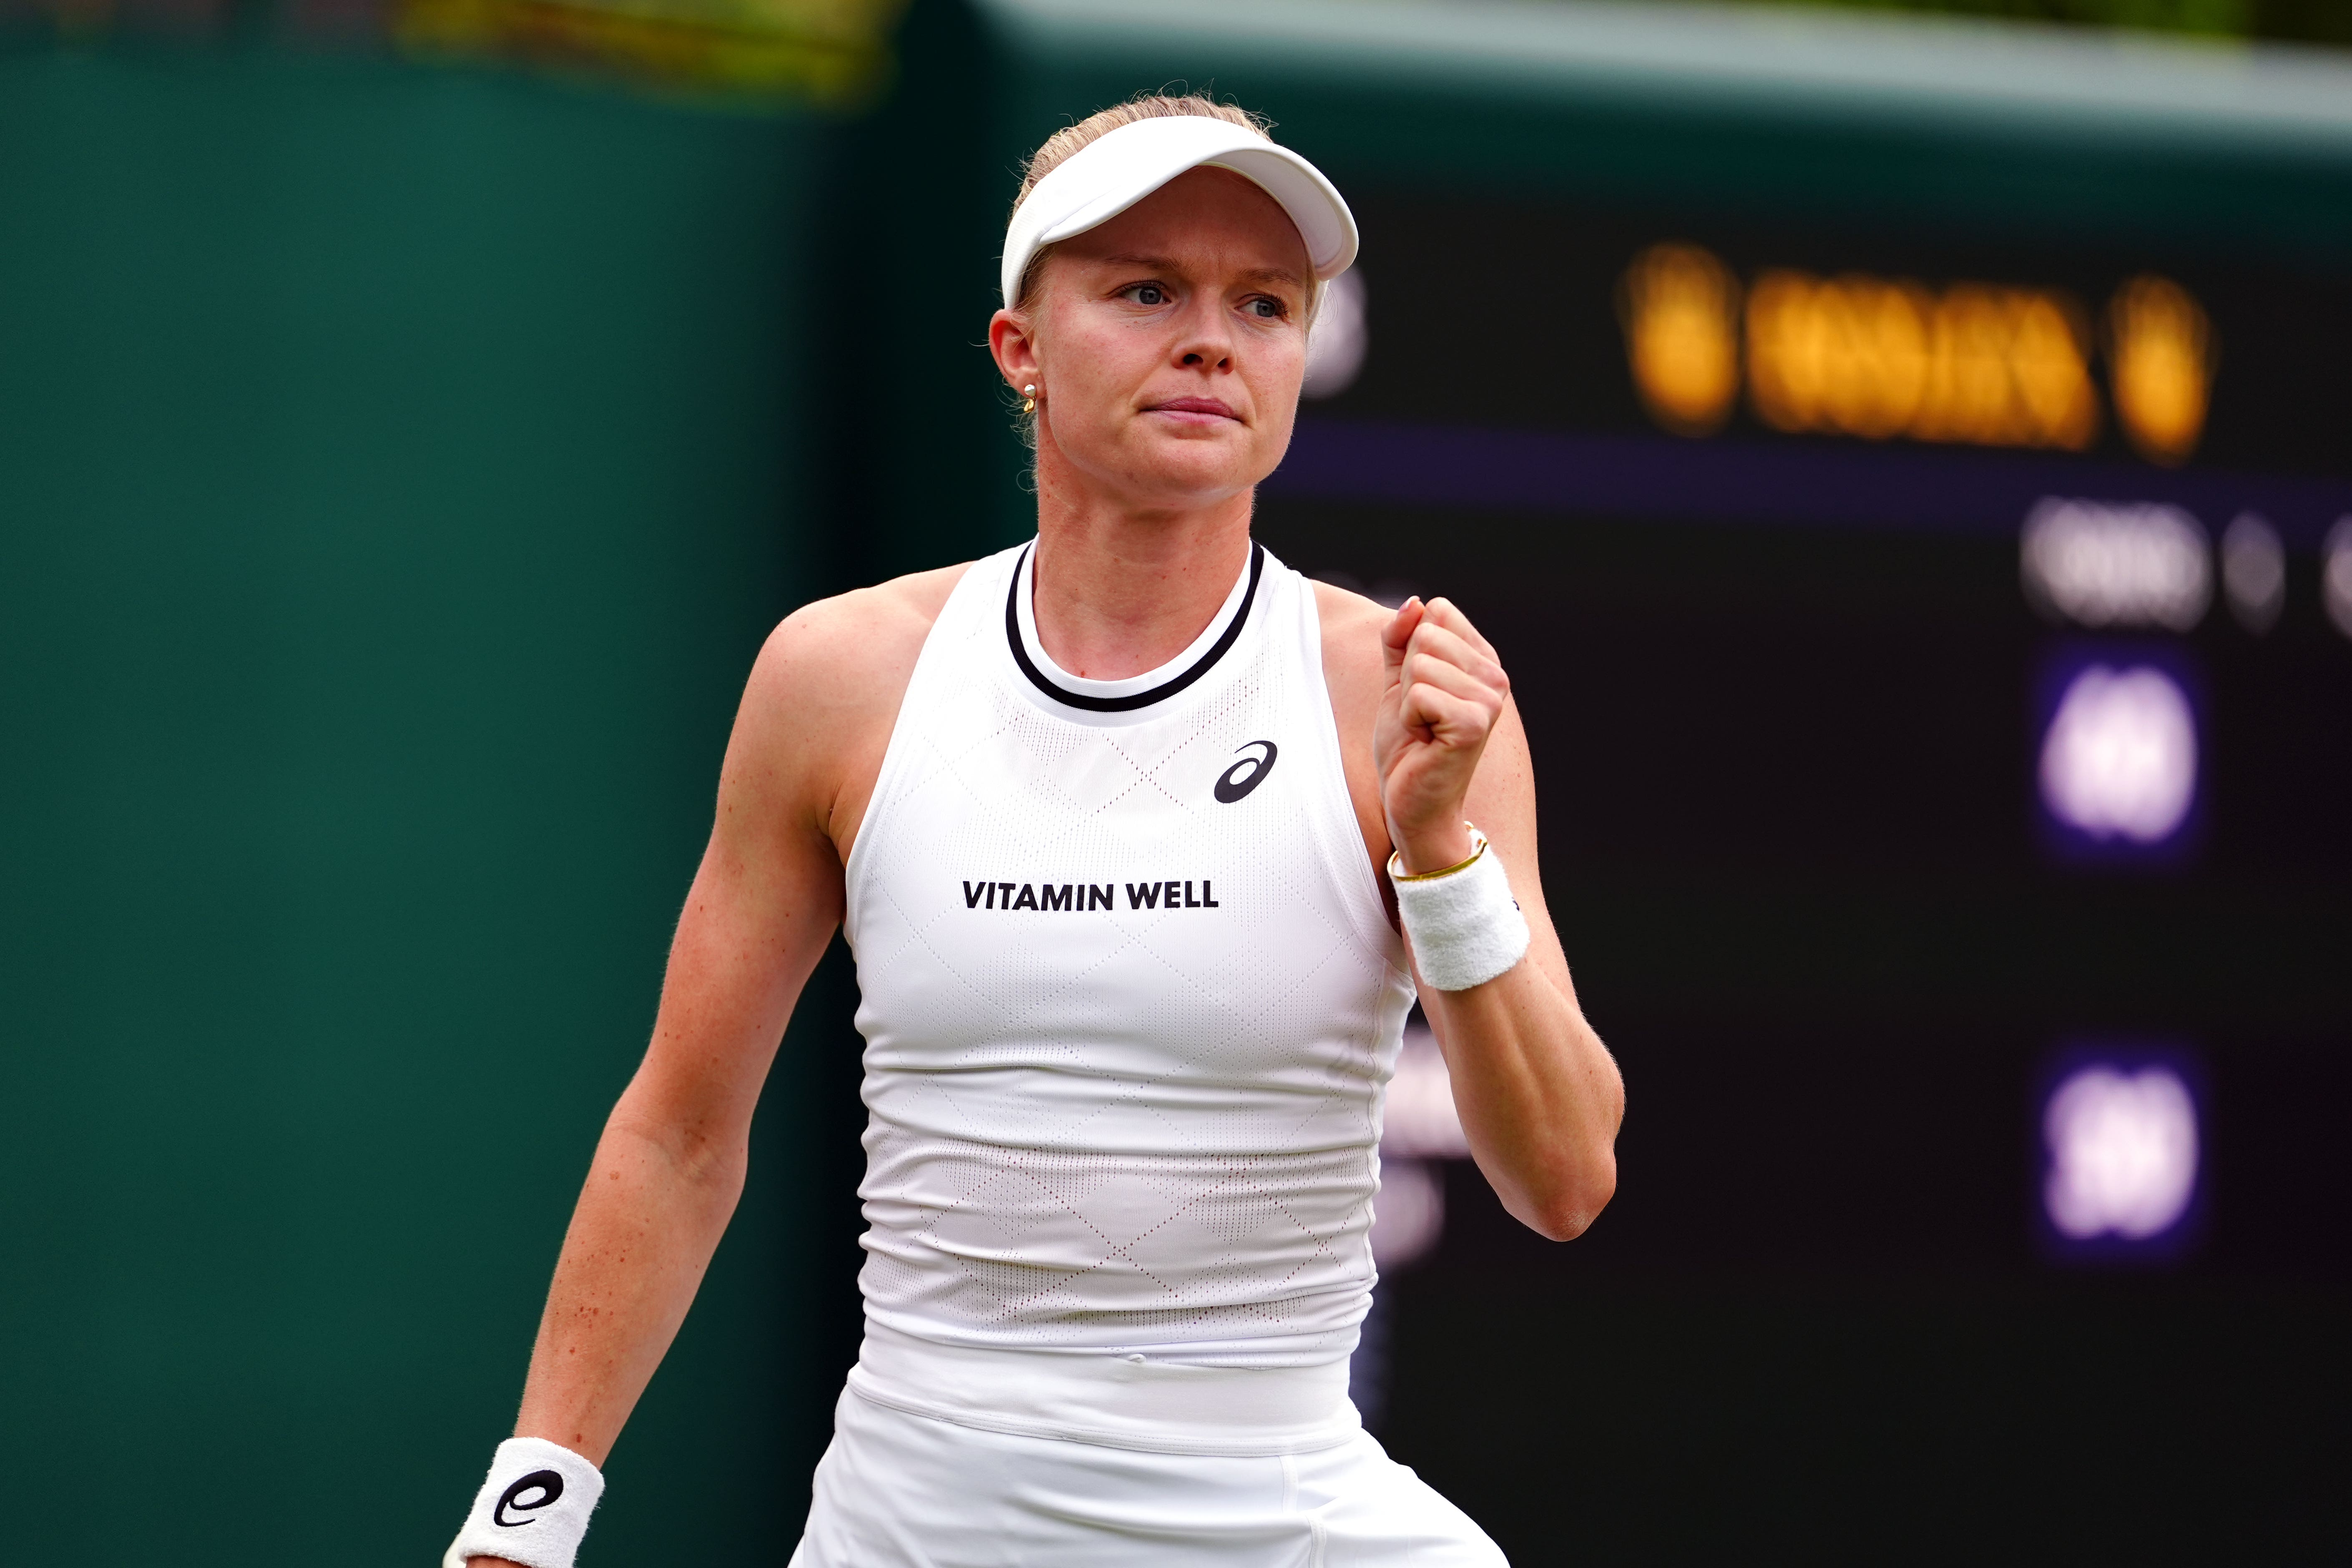 Harriet Dart will face Boulter in the second round on Thursday